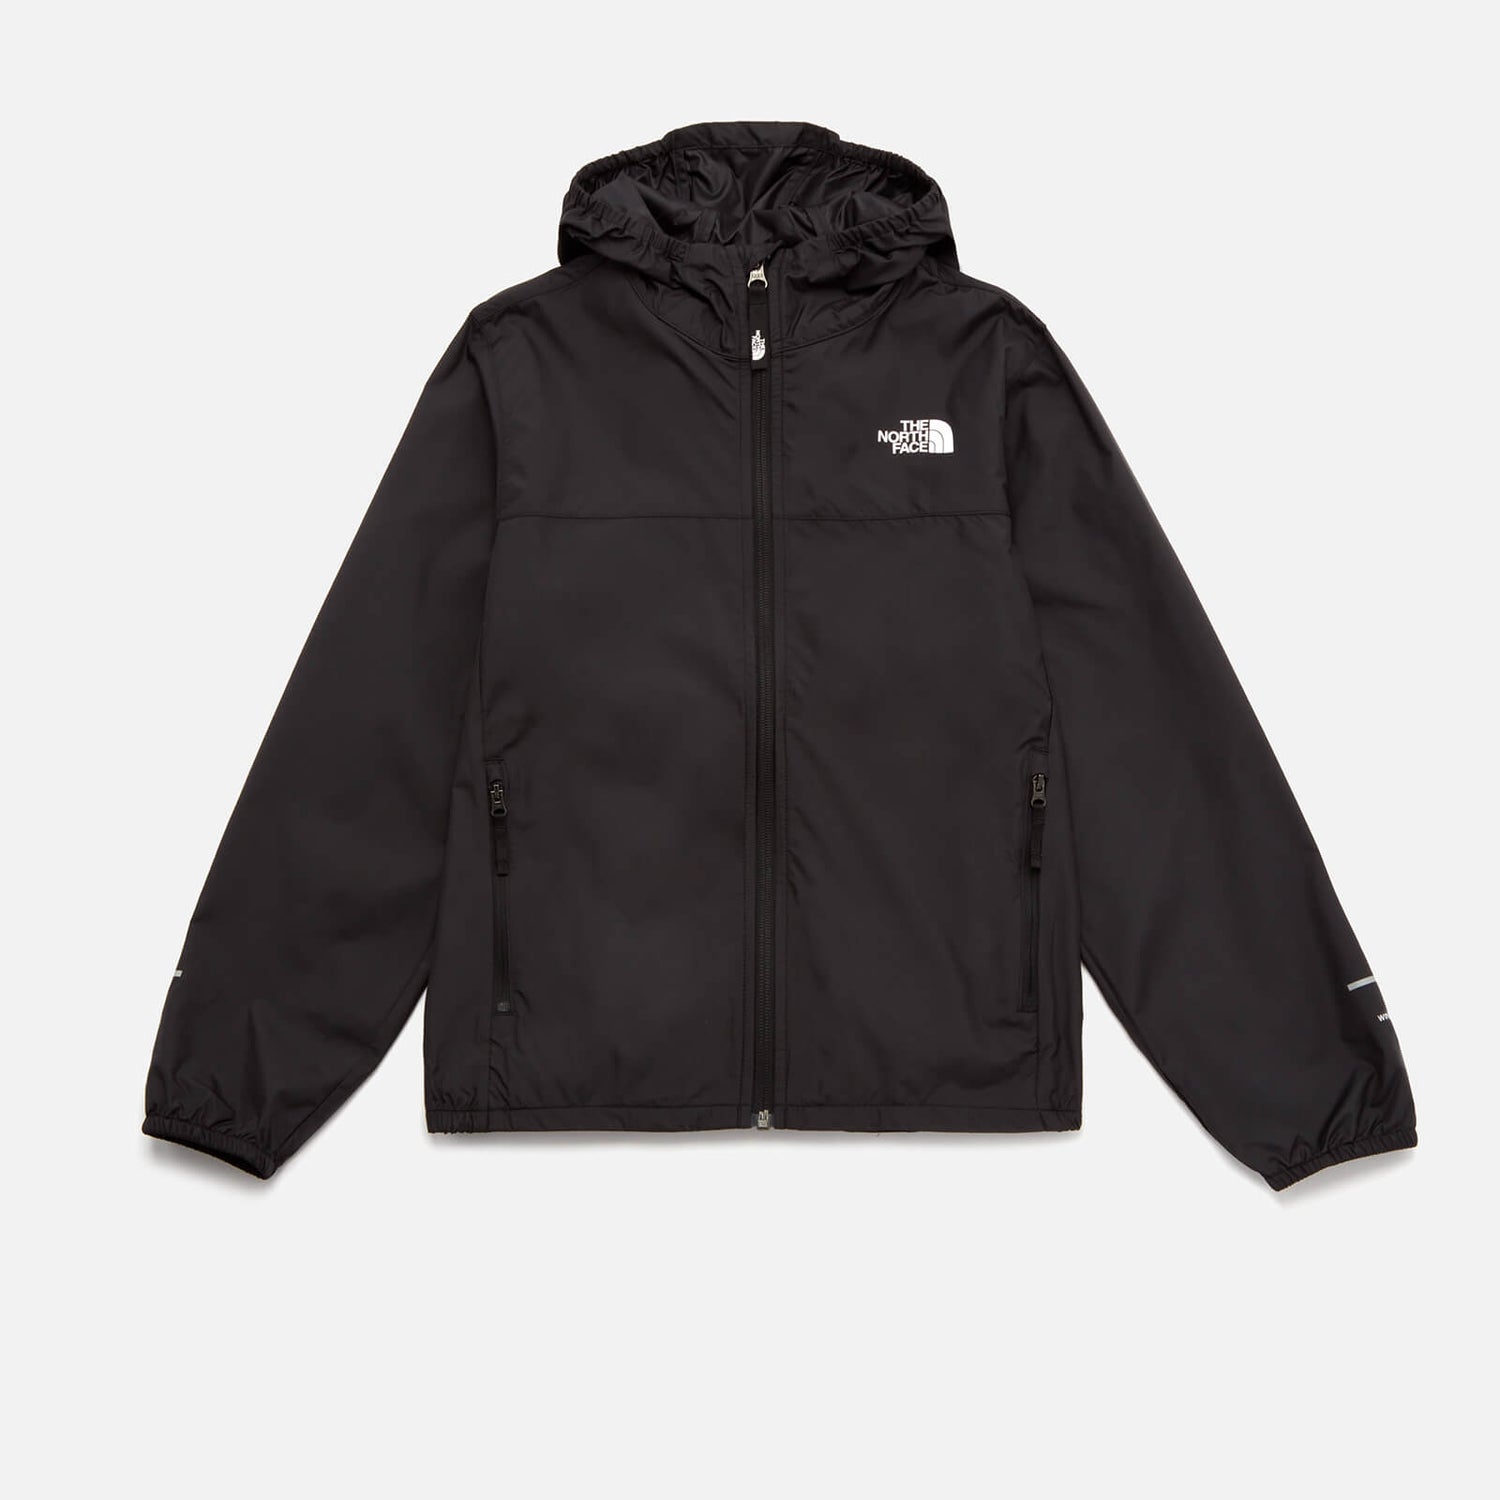 The North Face Boys' Reactor Wind Jacket - Black